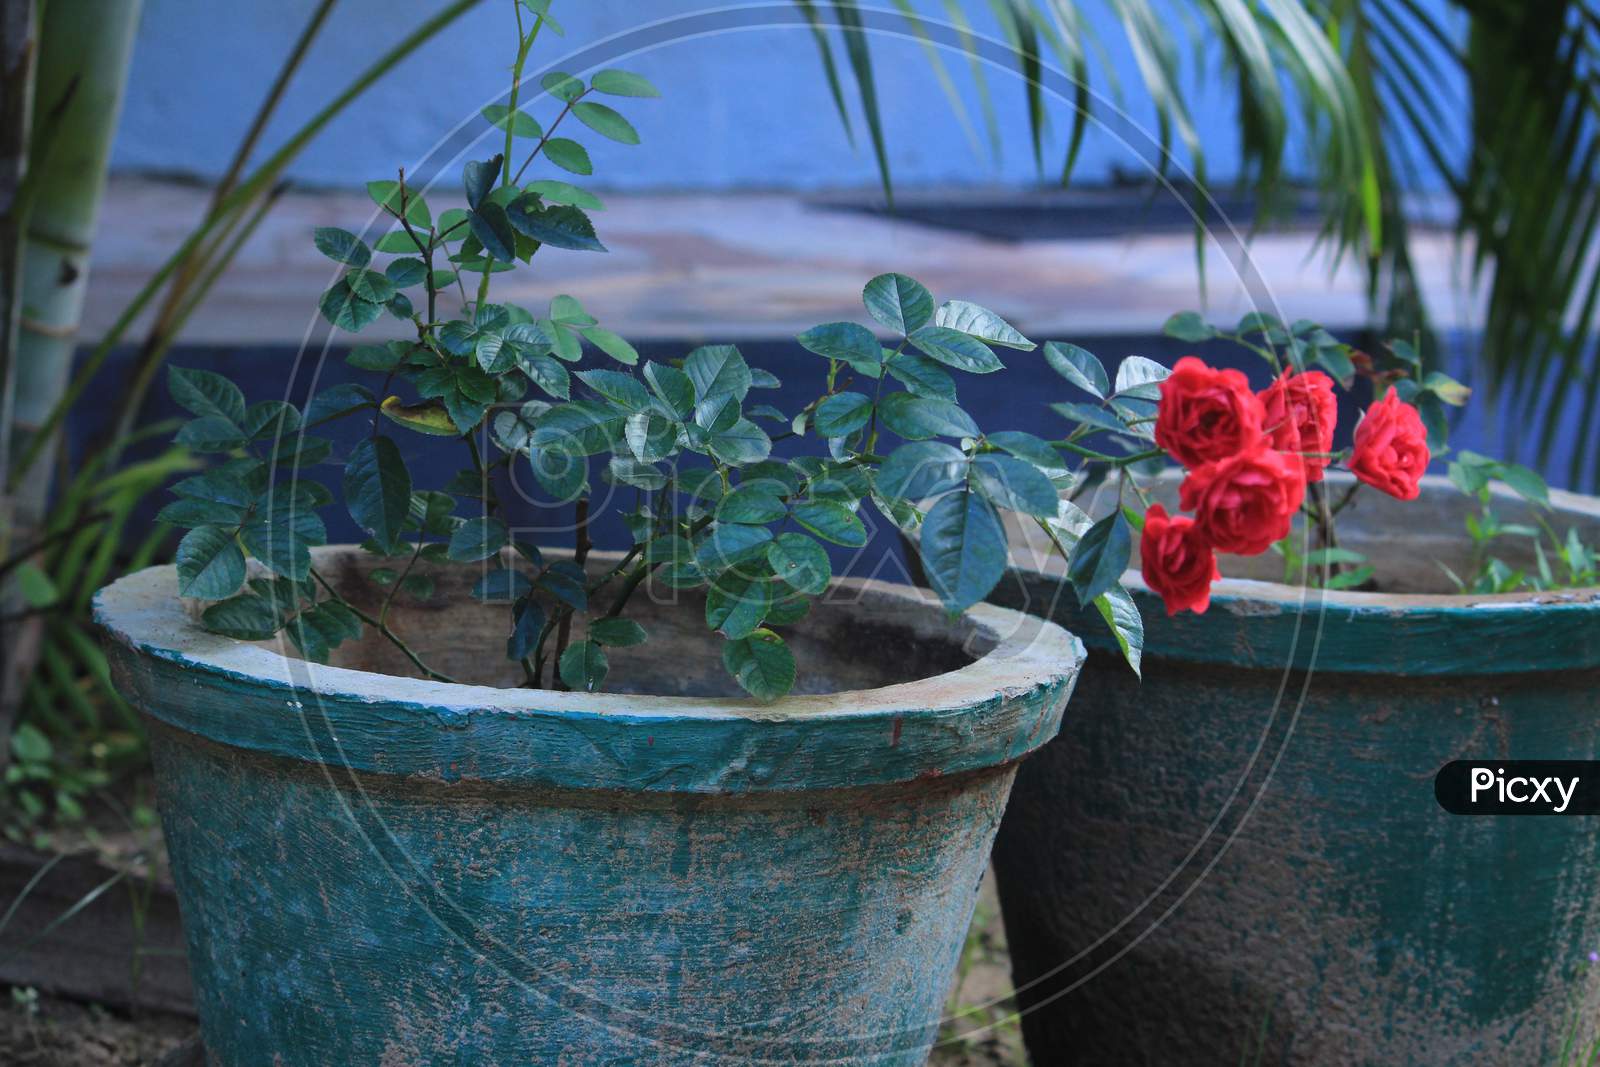 Pink Roses In The Flowerpots In The Garden. Roses For Valentines Day